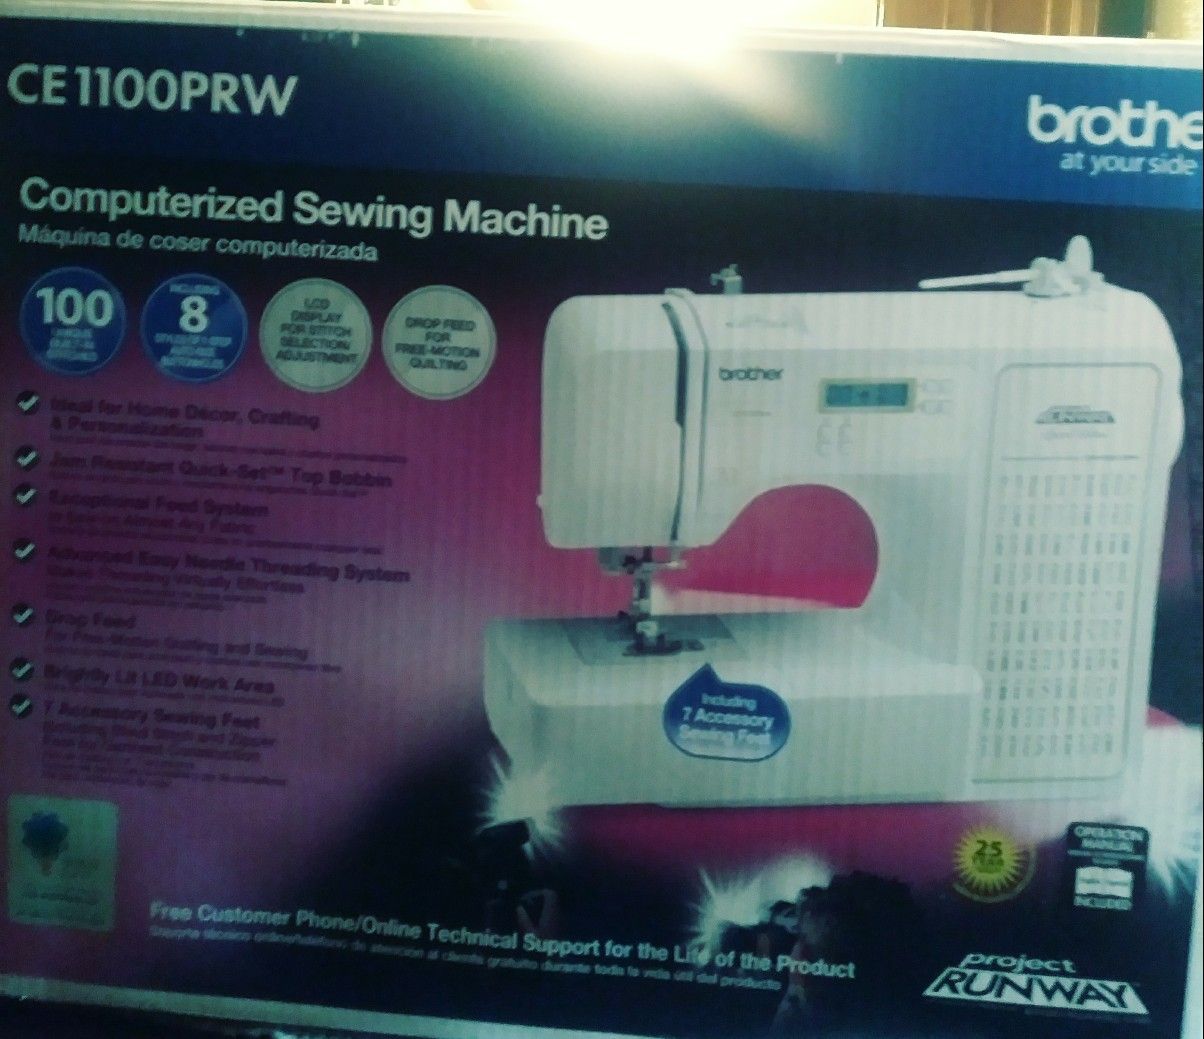 Brand new, never opened Computerized Sewing Machine Brother CE1100PRW